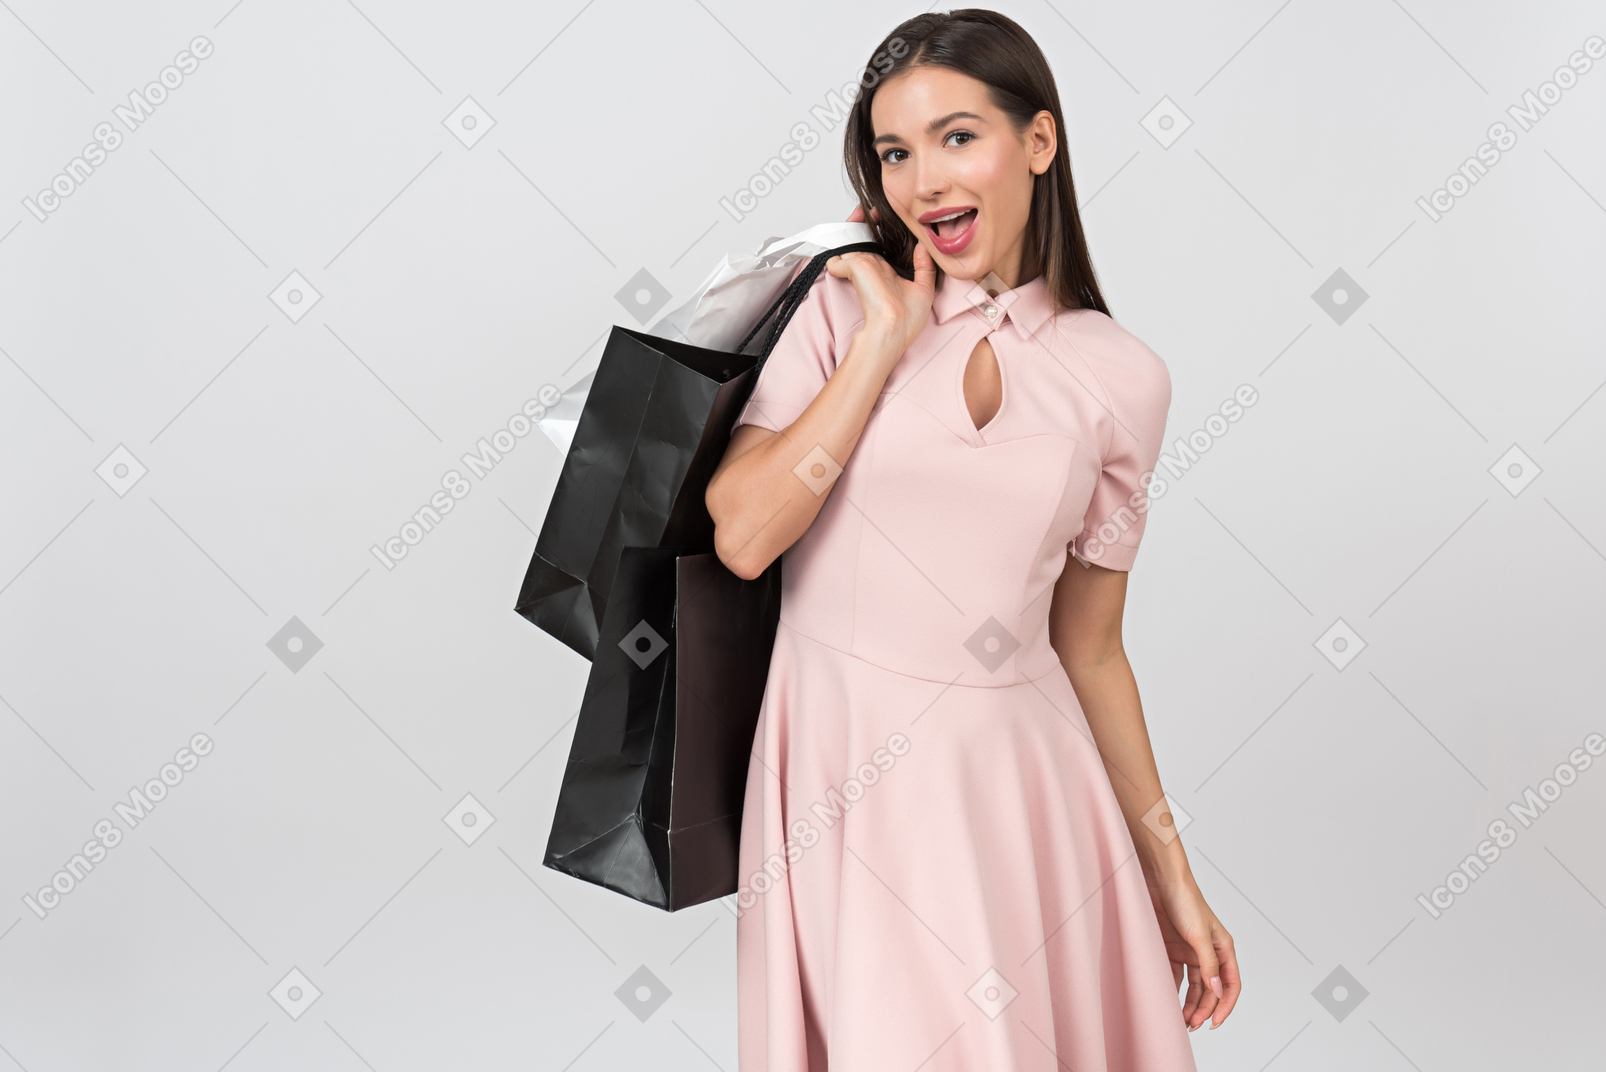 Excited young woman holding shopping bags